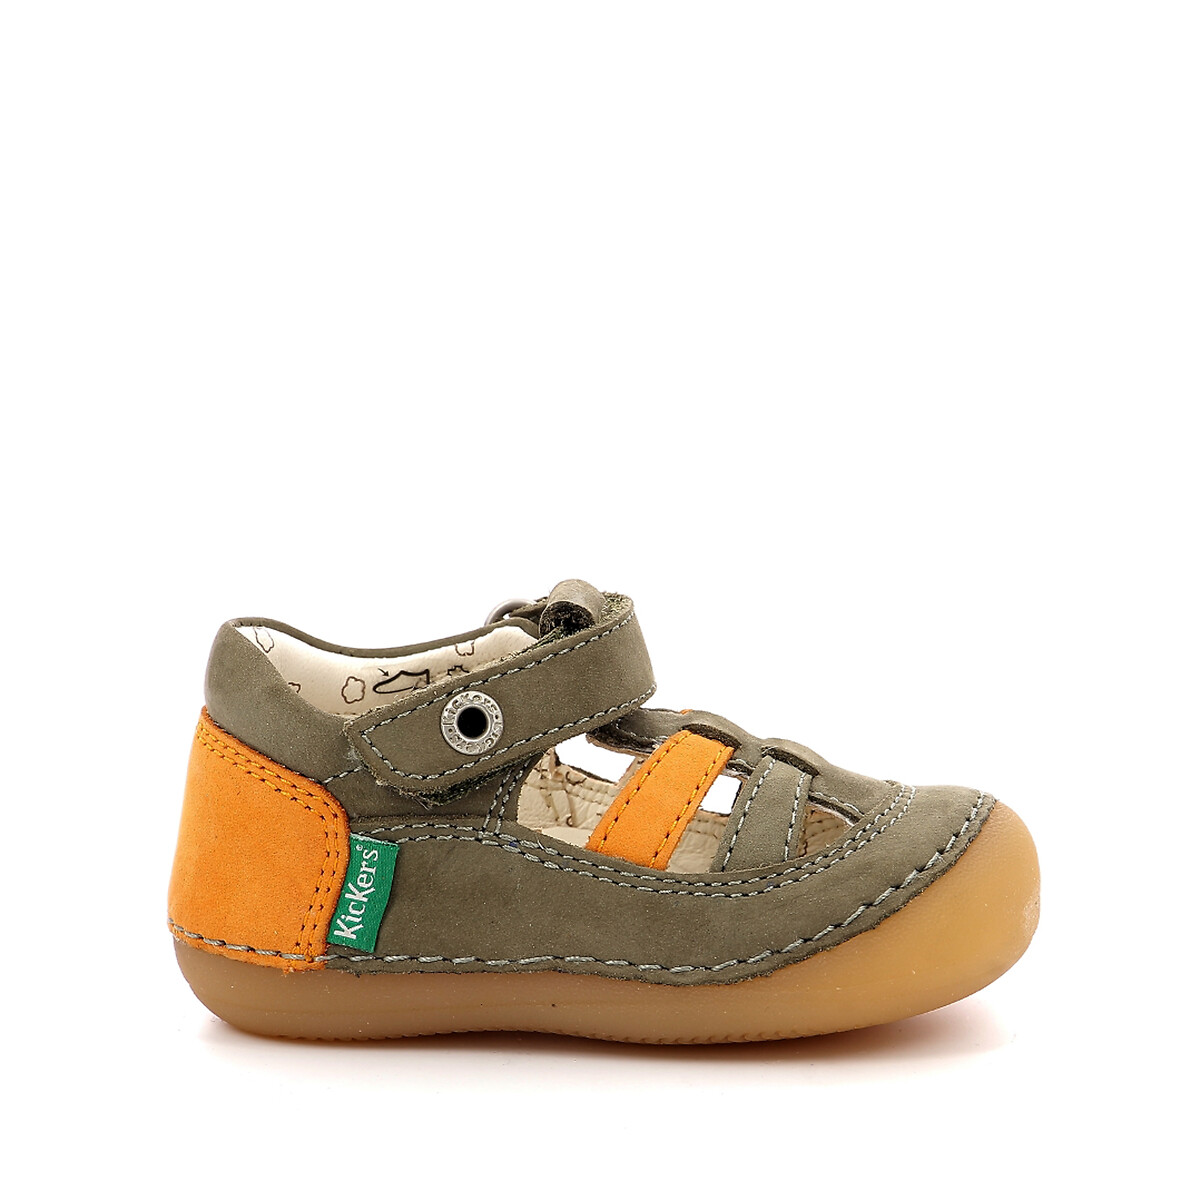 Image of Kids Sushy Leather Sandals with Closed Toe and Touch 'n' Close Fastening